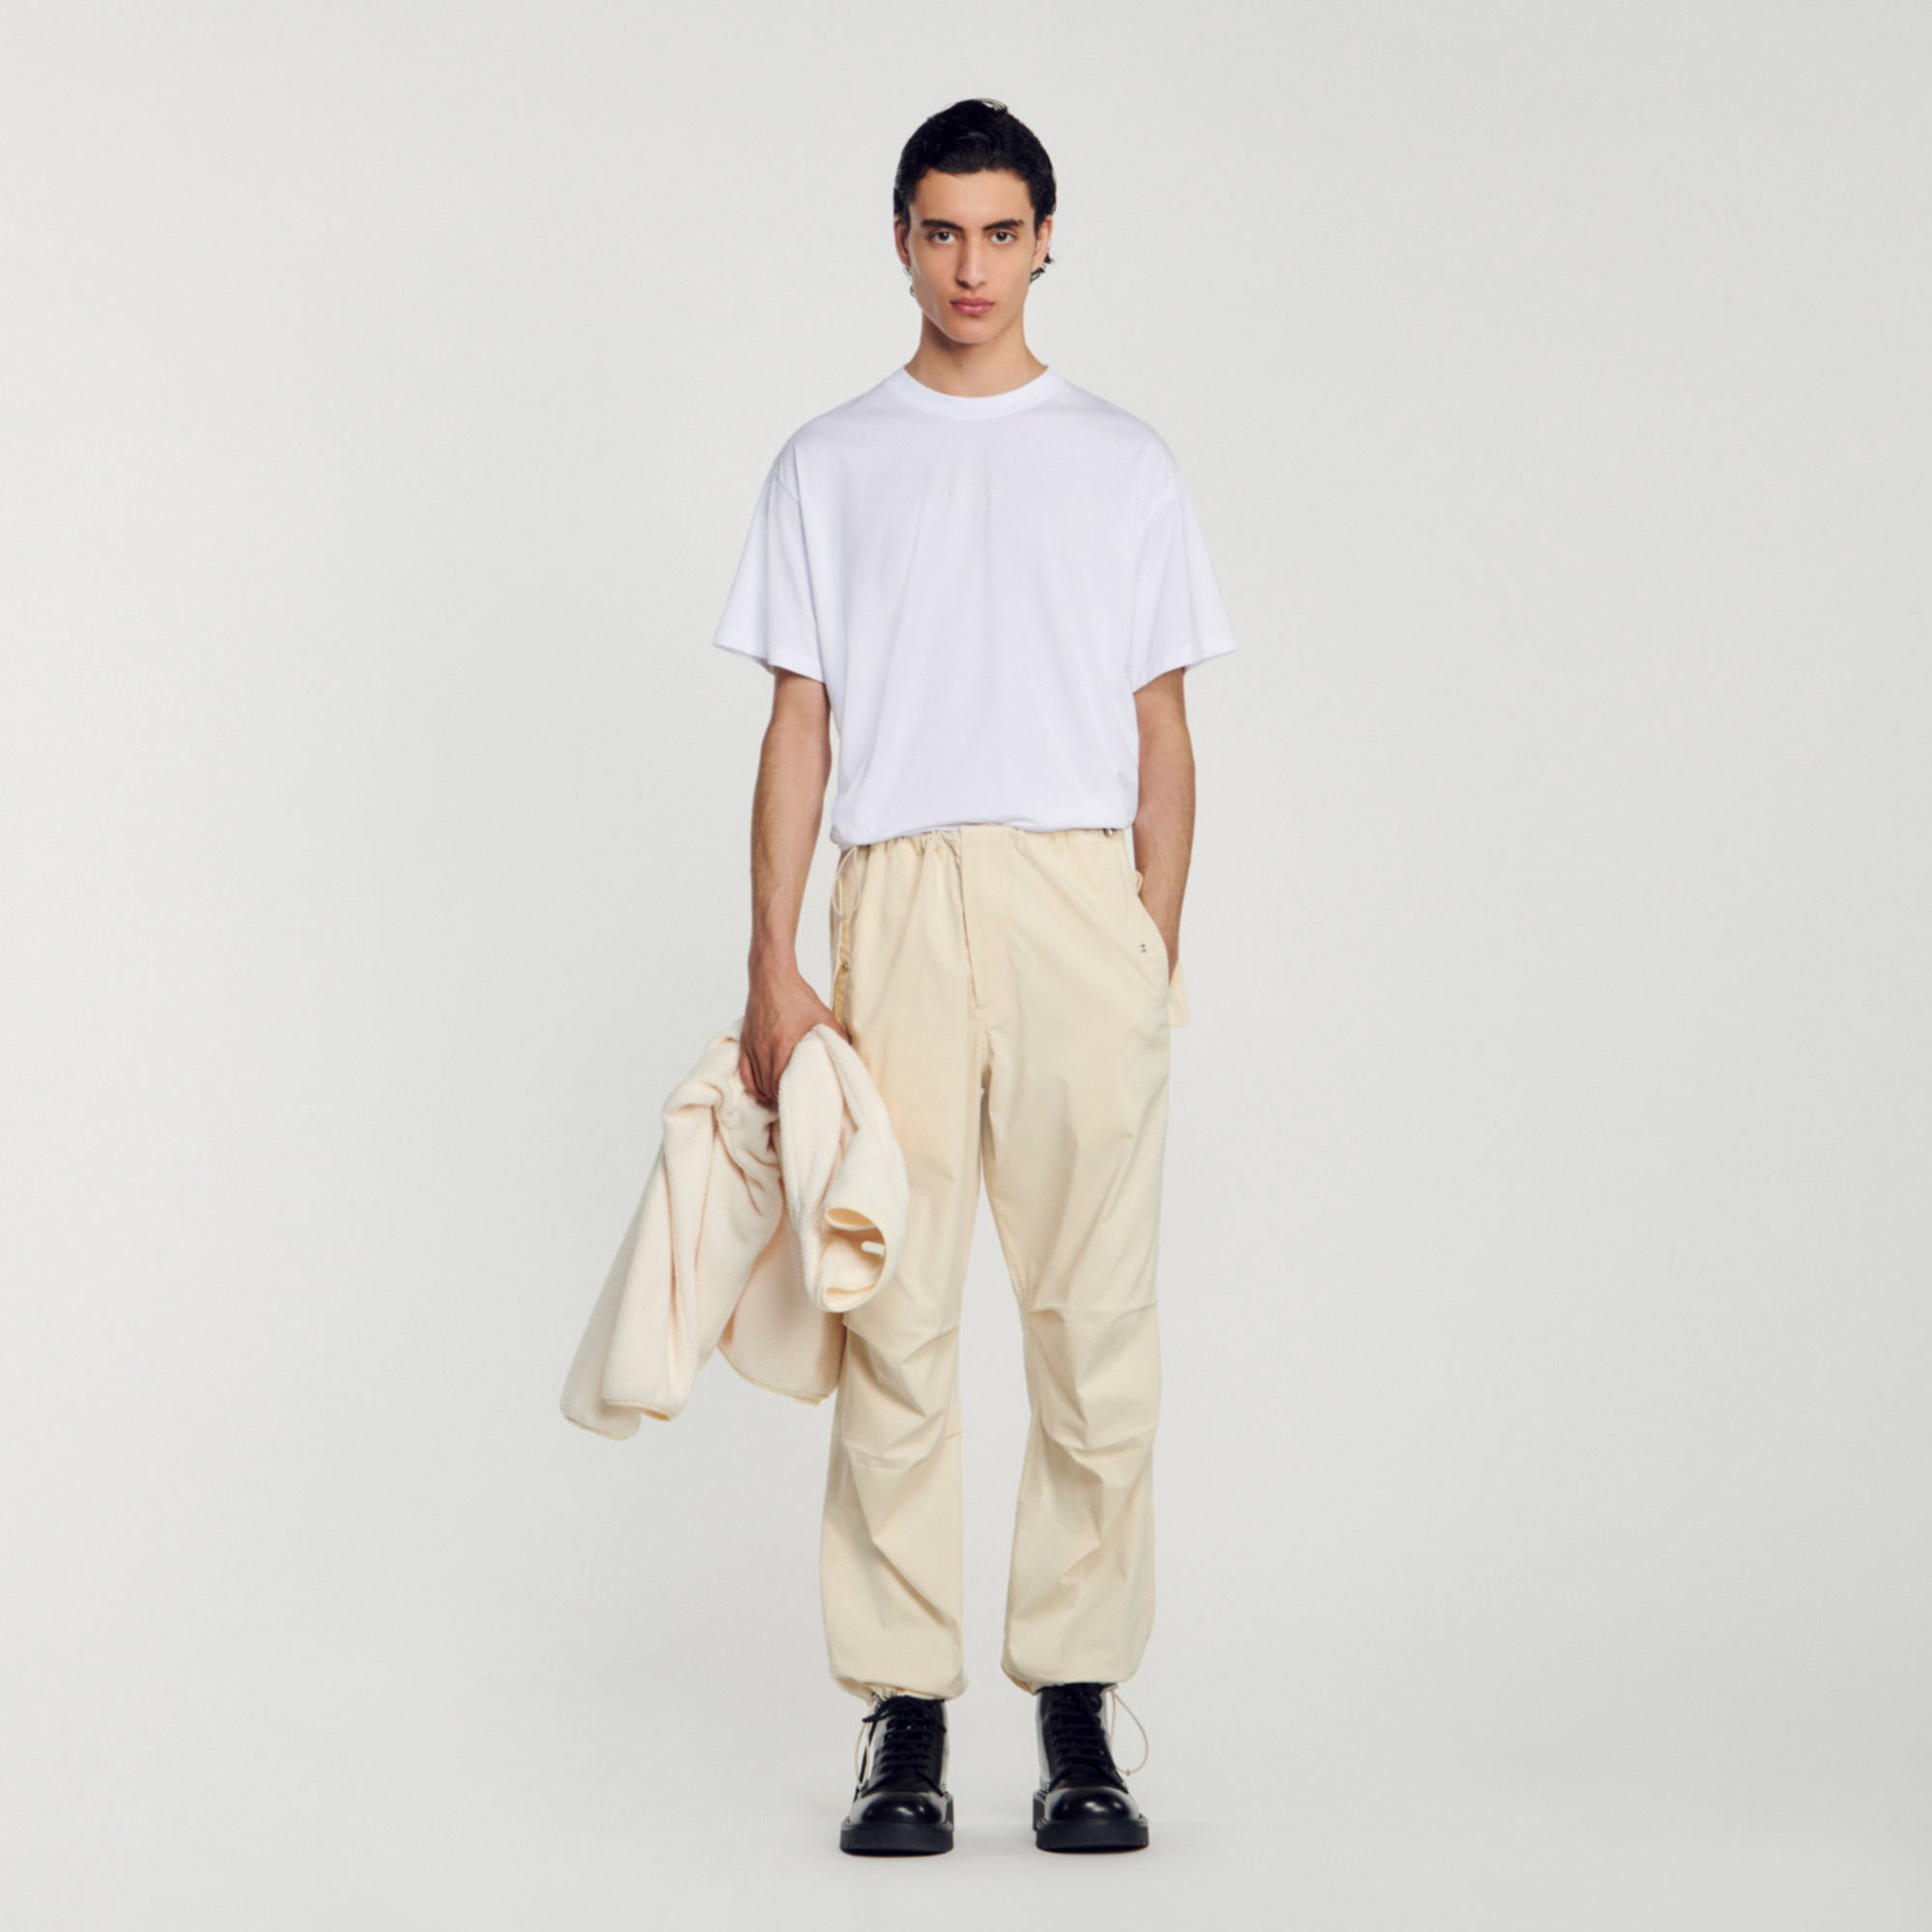 Sandro cotton Rib: Oversized T-shirt with a round neck, short sleeves and a rubber Sandro logo on the front